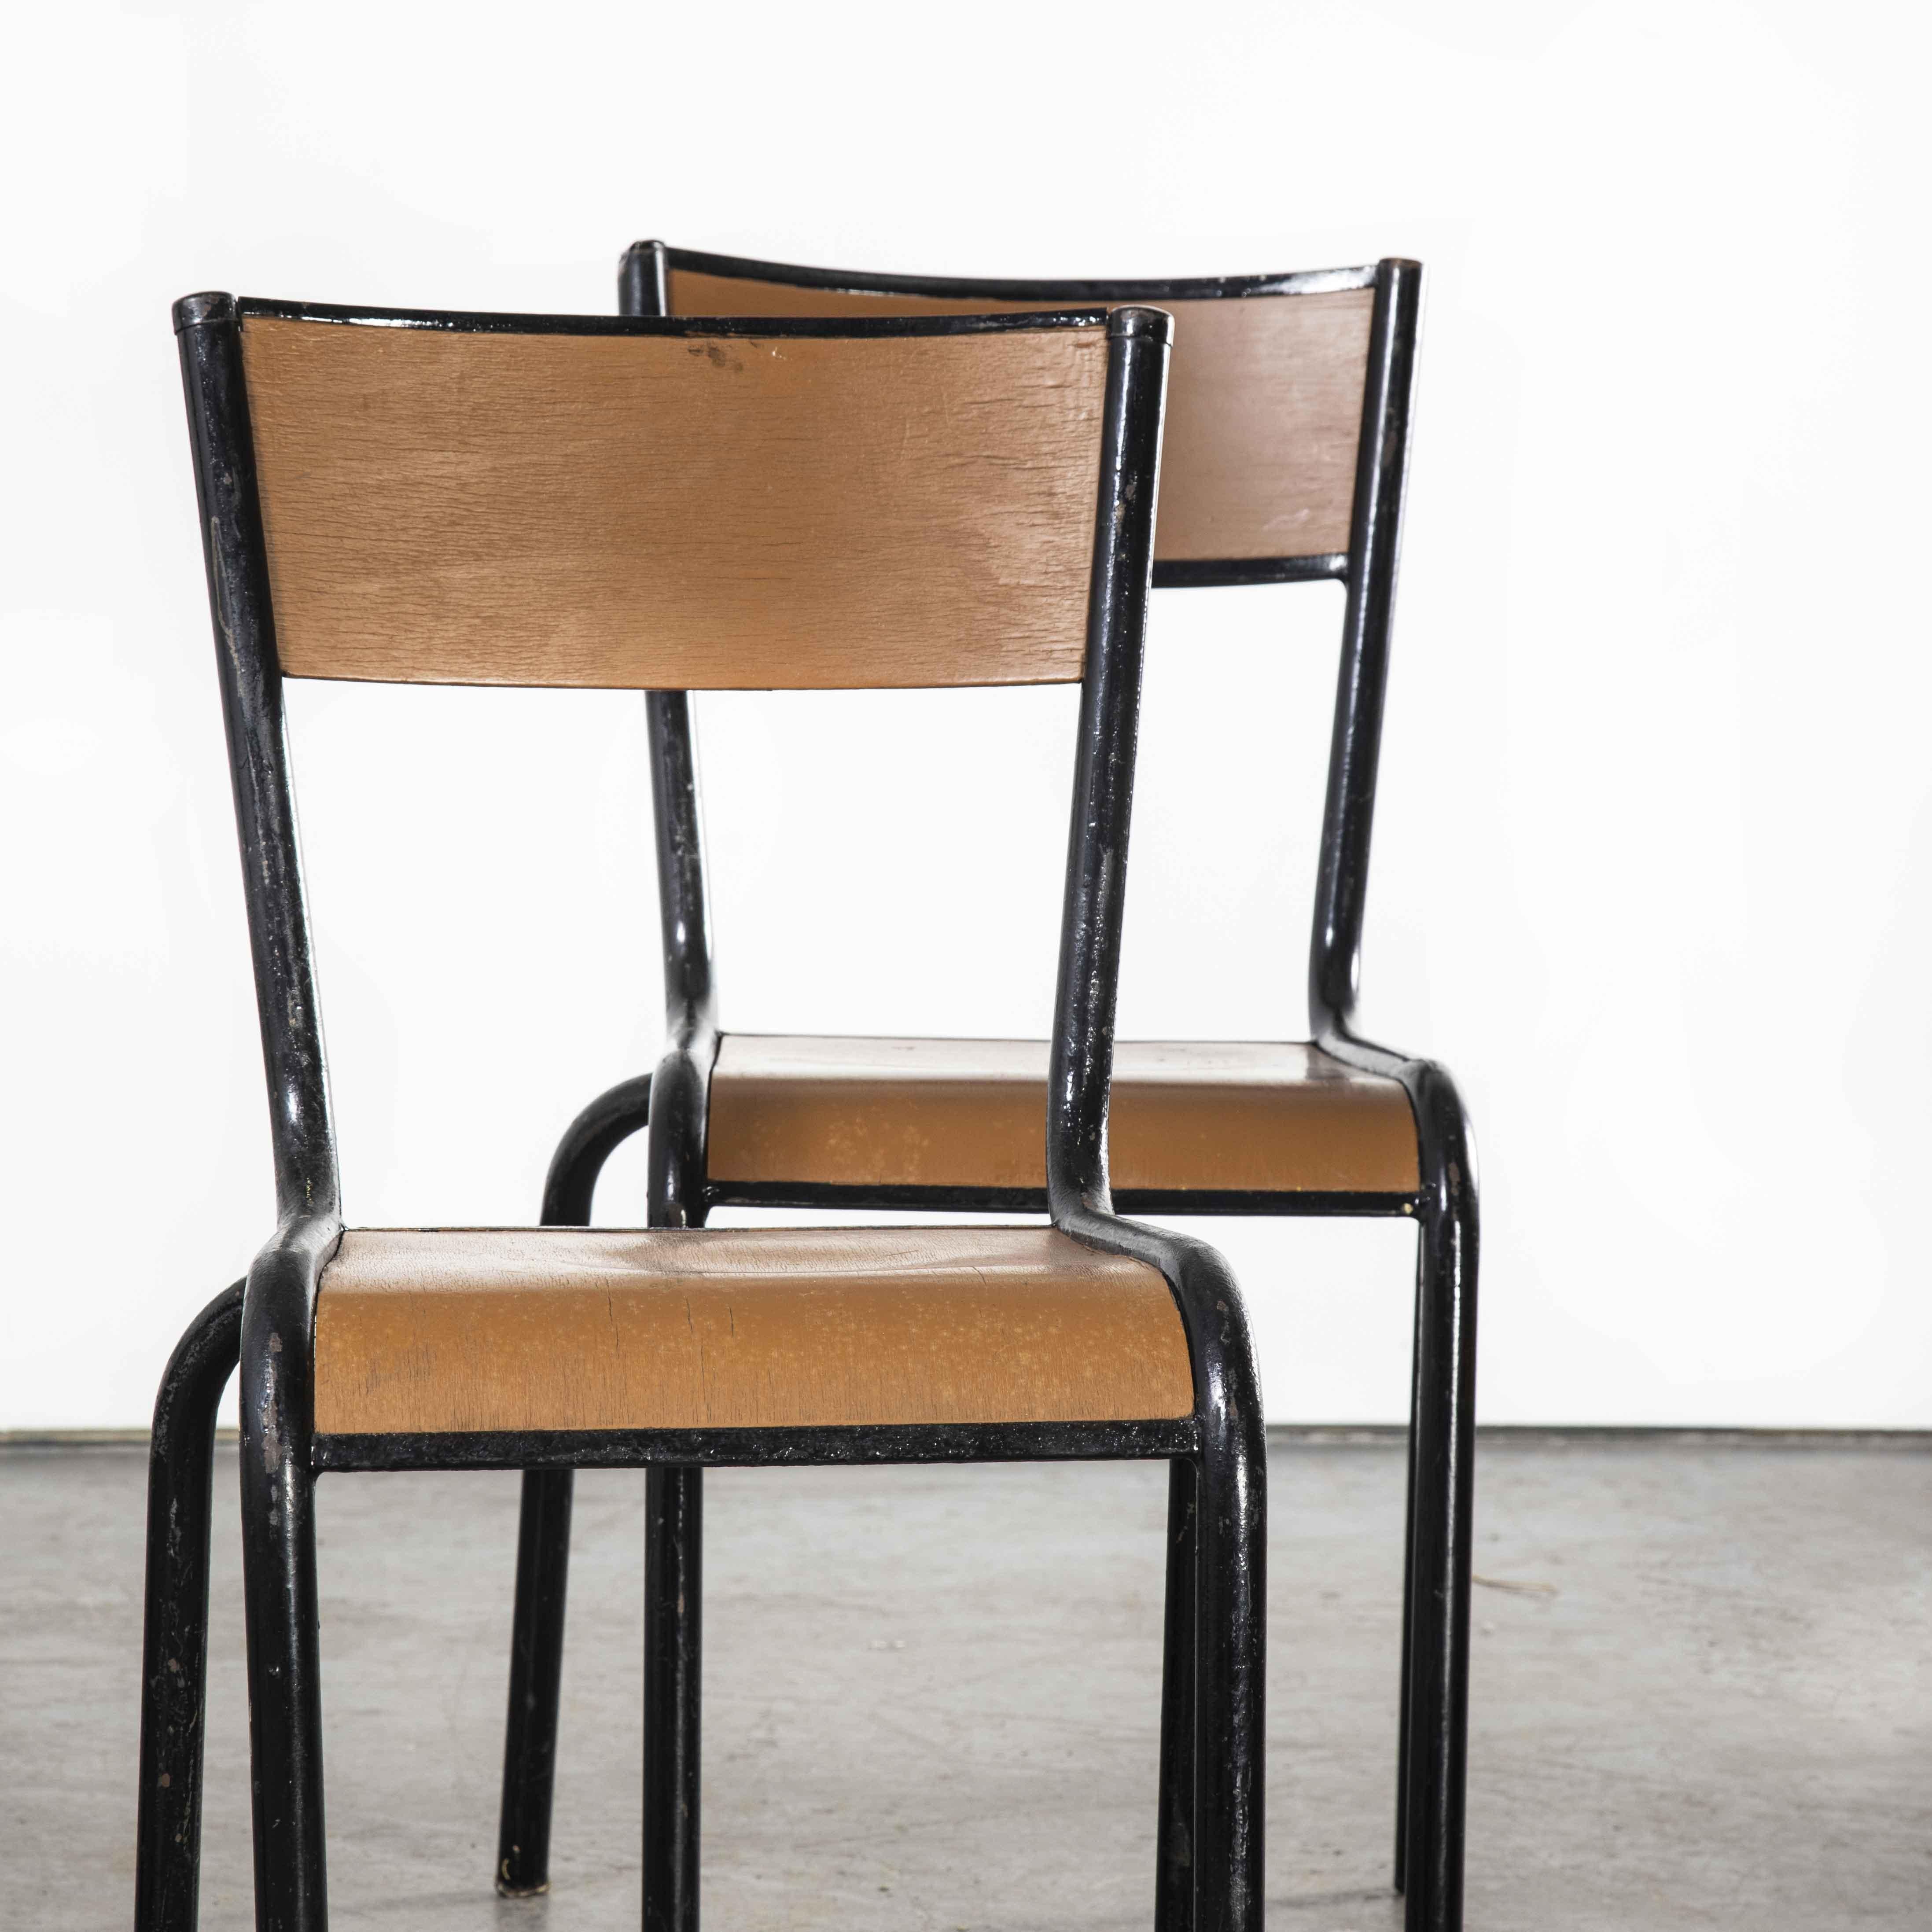 1950’s French Mullca vintage stacking school – dining chairs – brown model 510 – set of four

1950’s French Mullca vintage stacking school – dining chairs – brown model 510 – set of four. One of our most favourite chairs, in 1947 Robert Muller and